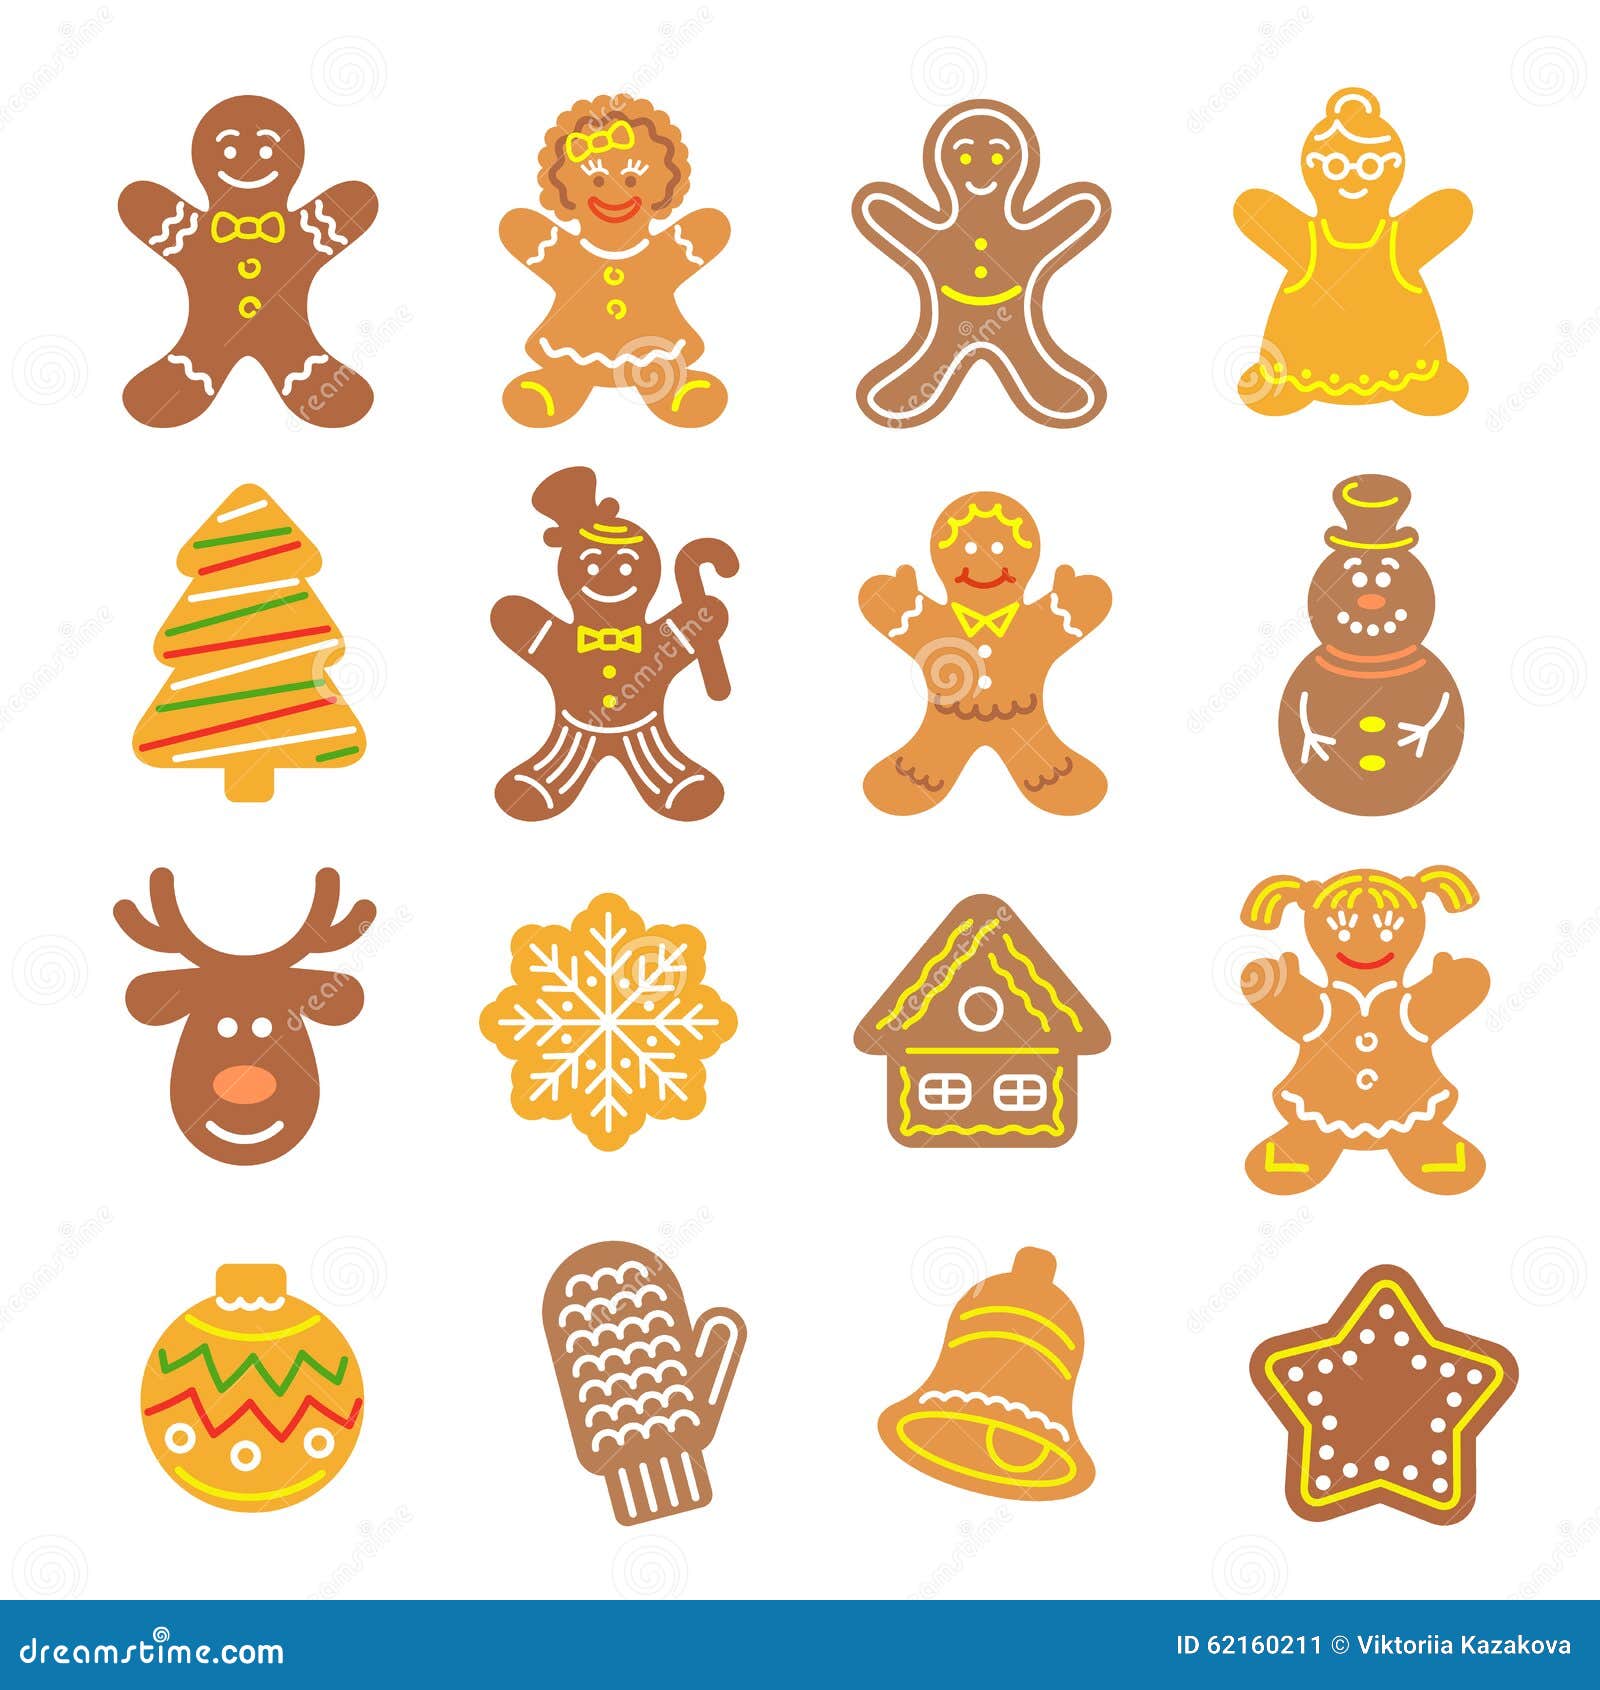 Biscotti Di Natale Gingerbread.Christmas Cookies Flat Icons Set Stock Vector Illustration Of Baked Biscuit 62160211